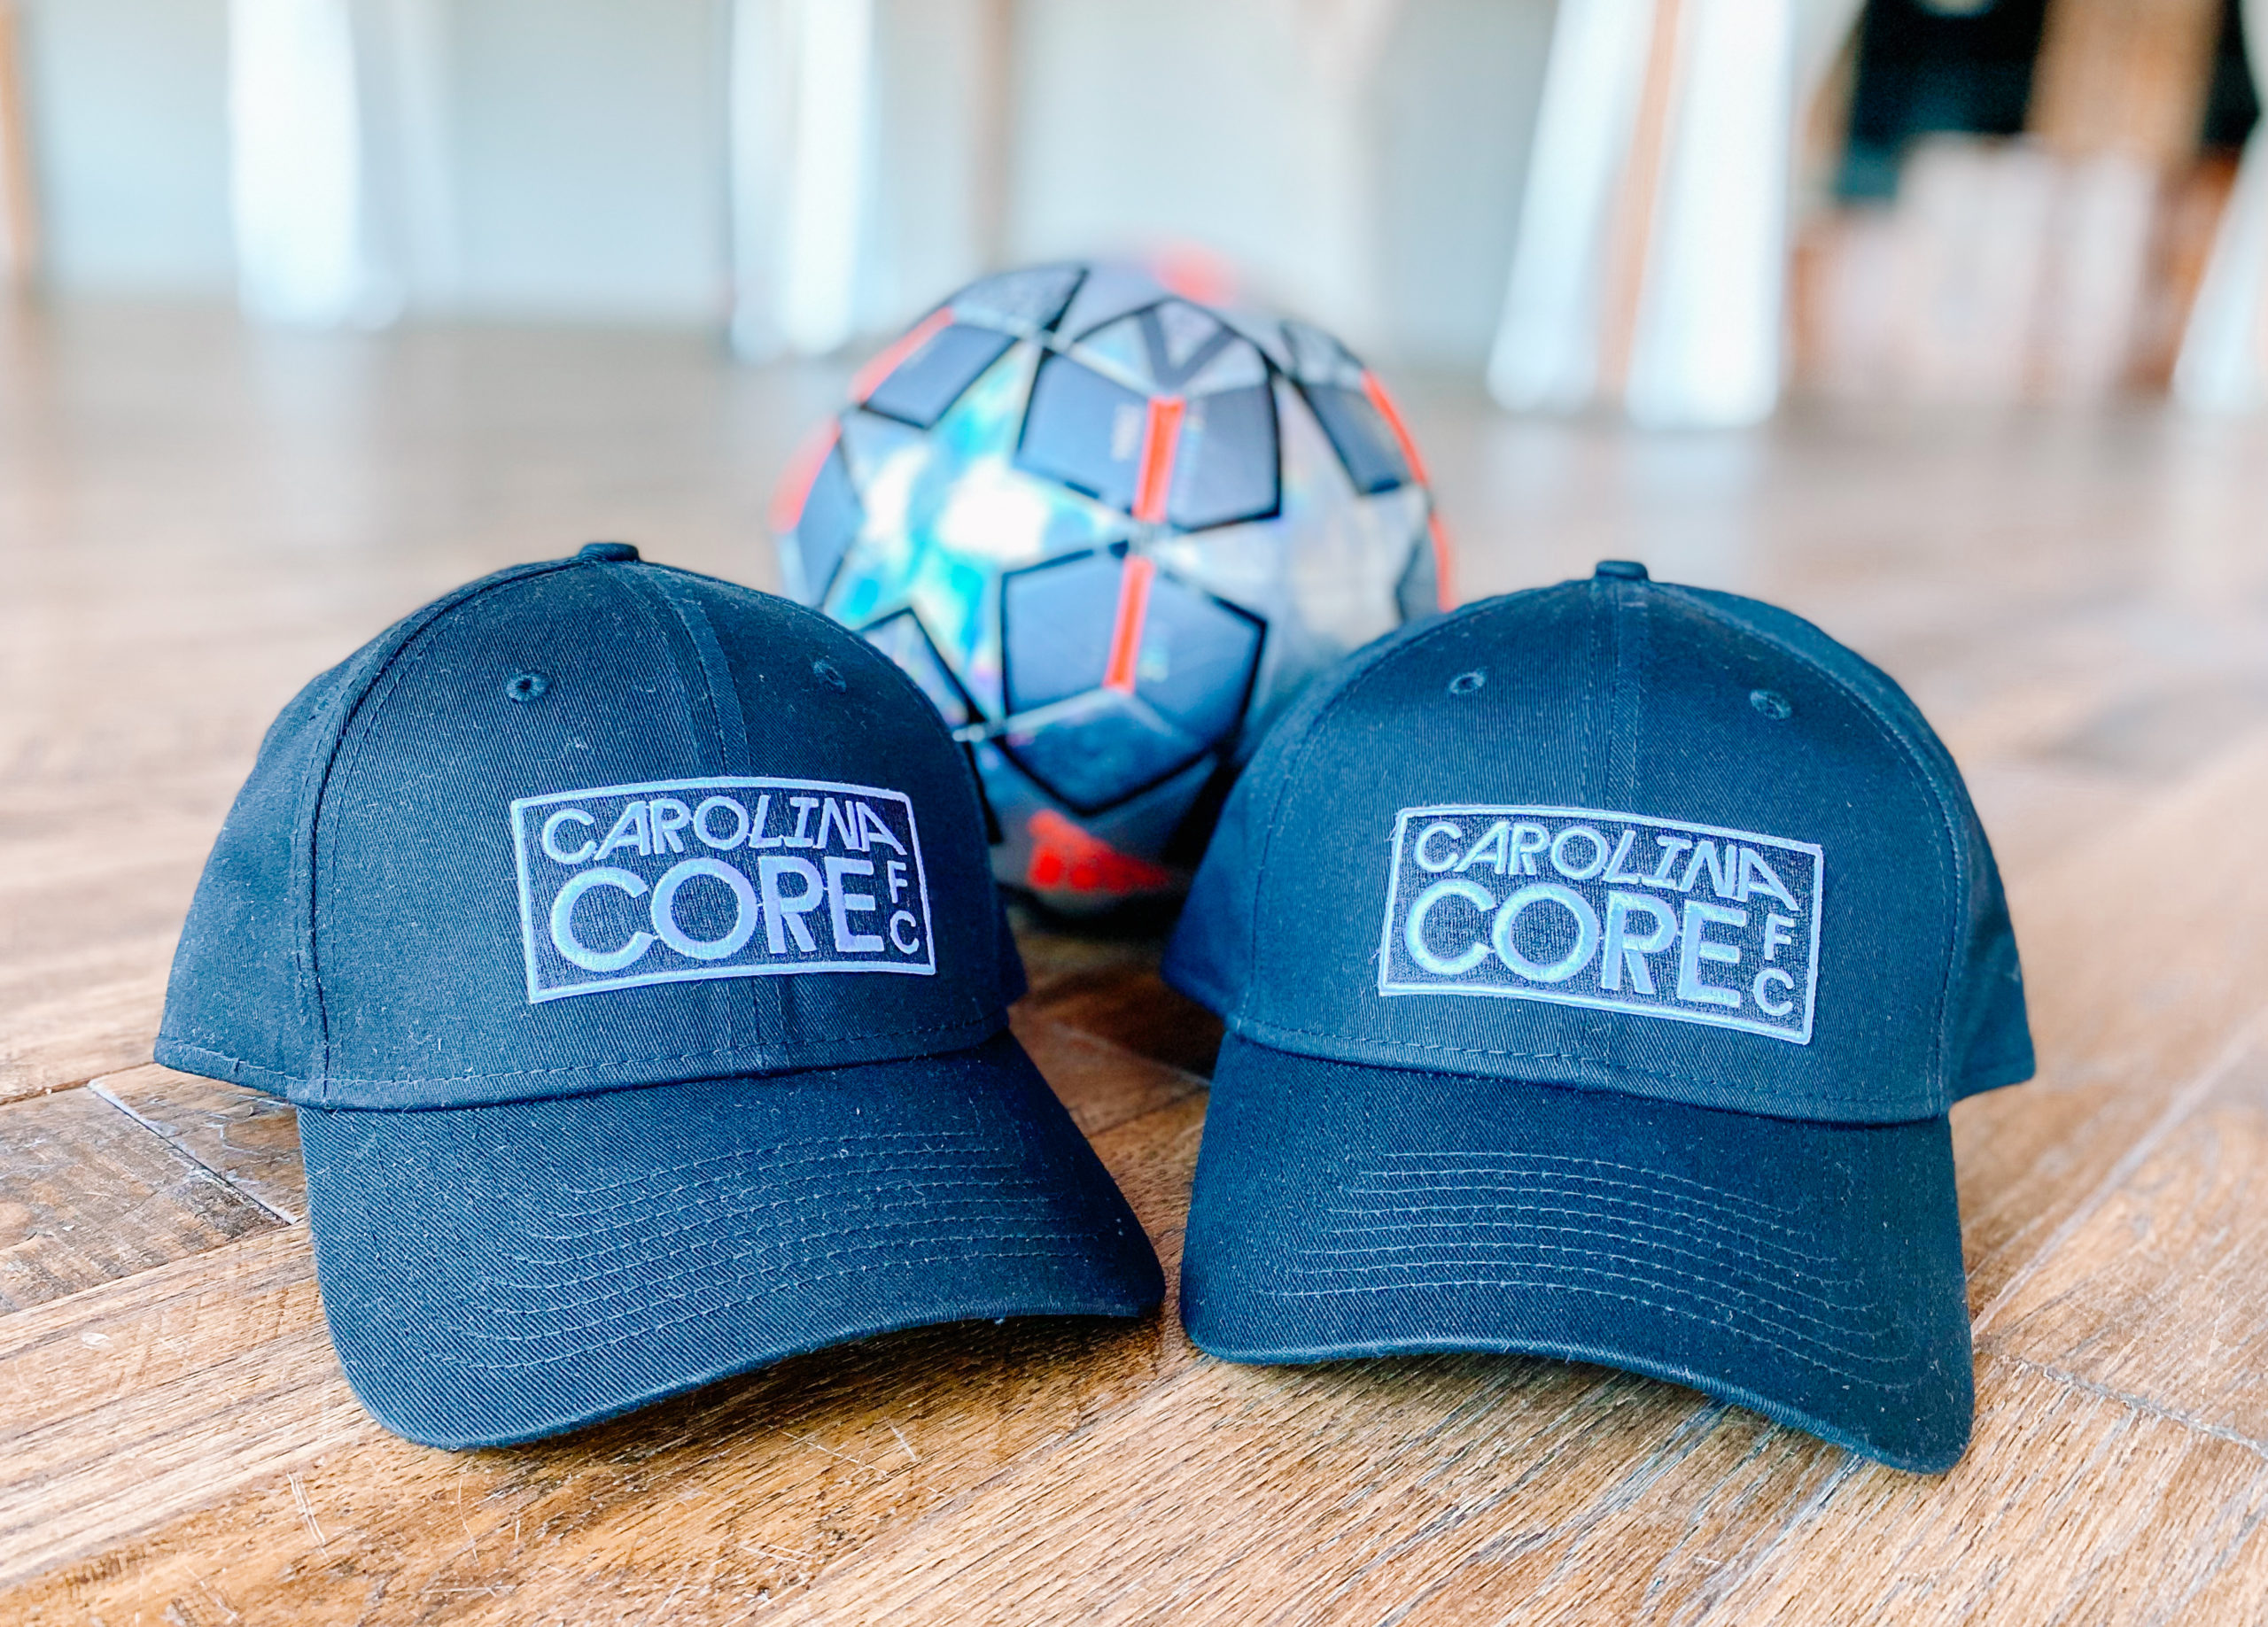 Two hats with the Carolina Core FC logo for the new MLS NEXT Pro soccer team in High Point, NC.